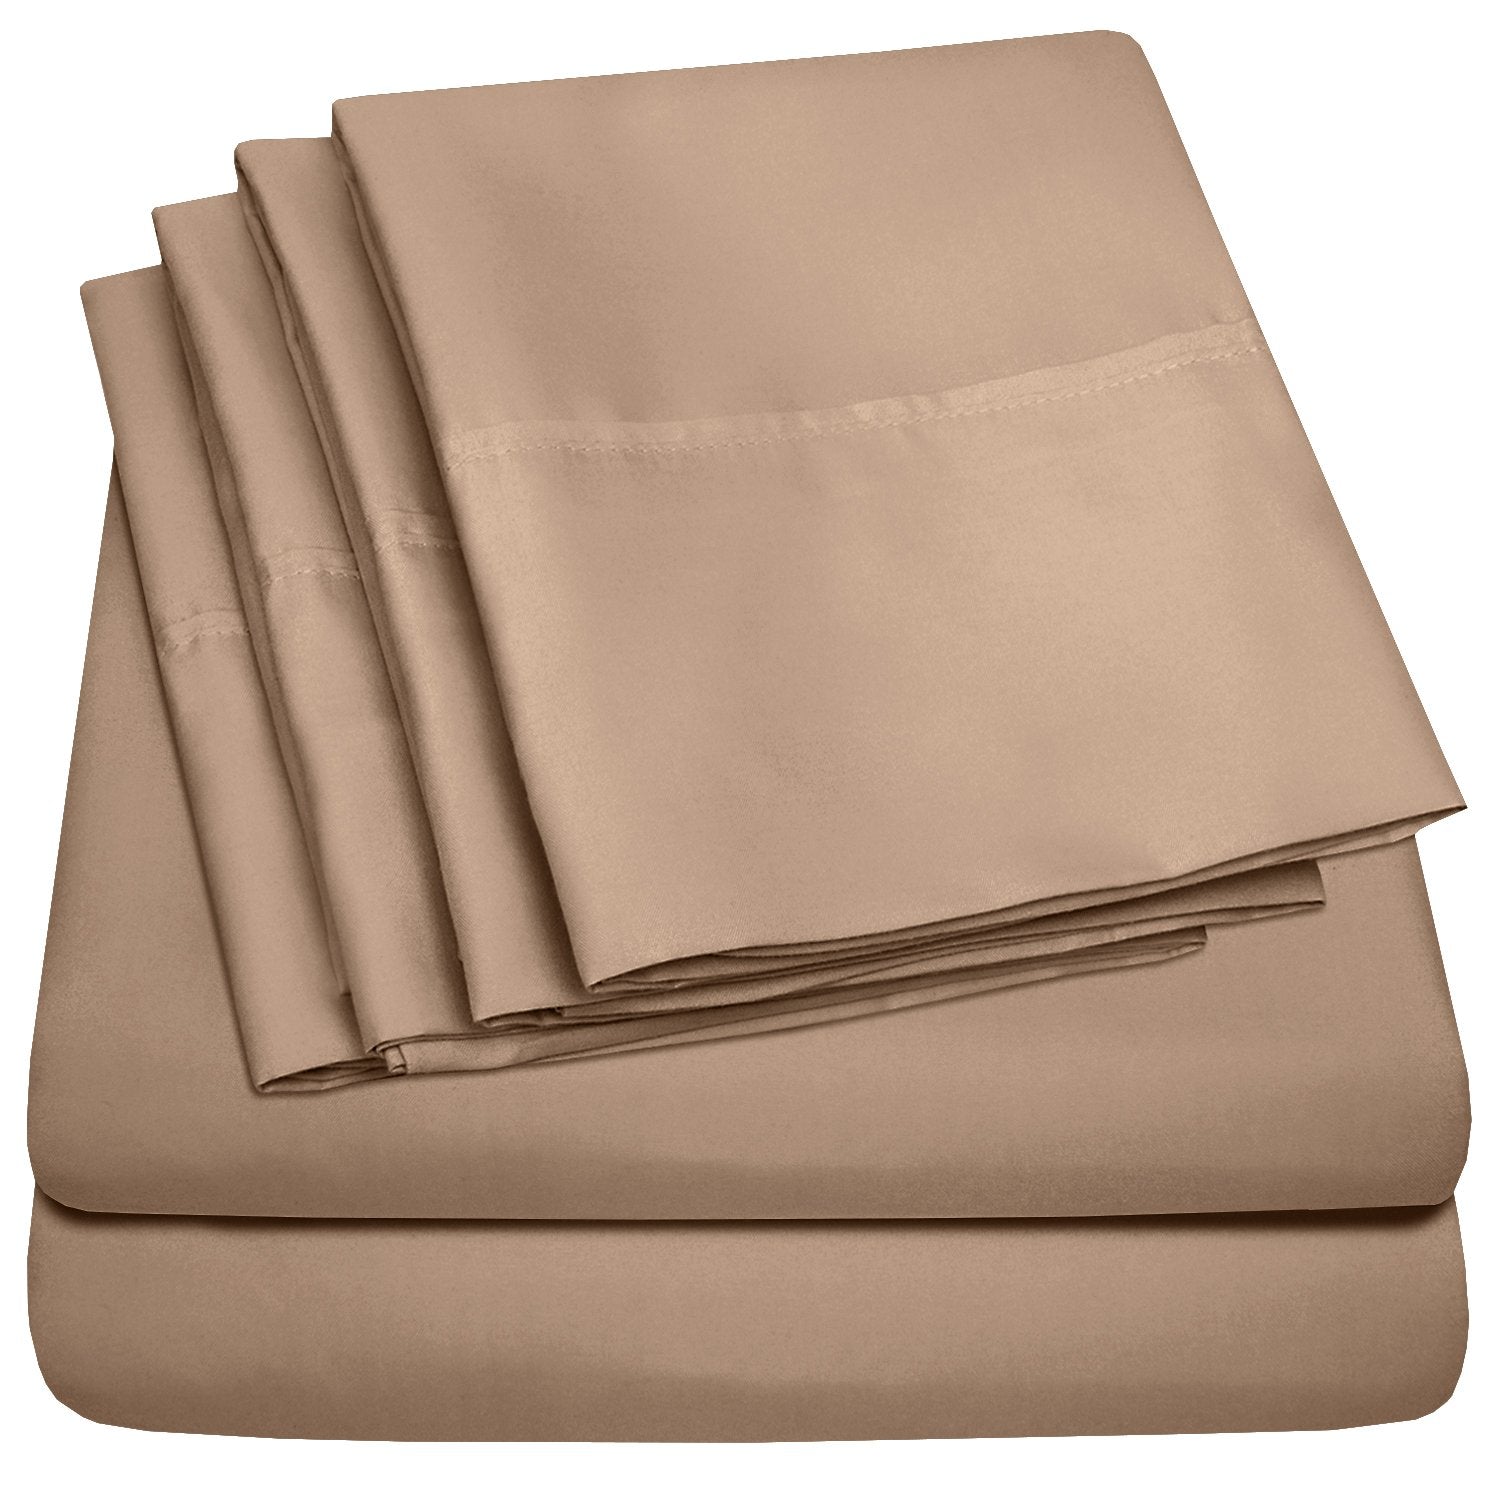 Deluxe 6-Piece Bed Sheet Set (Taupe) - Folded